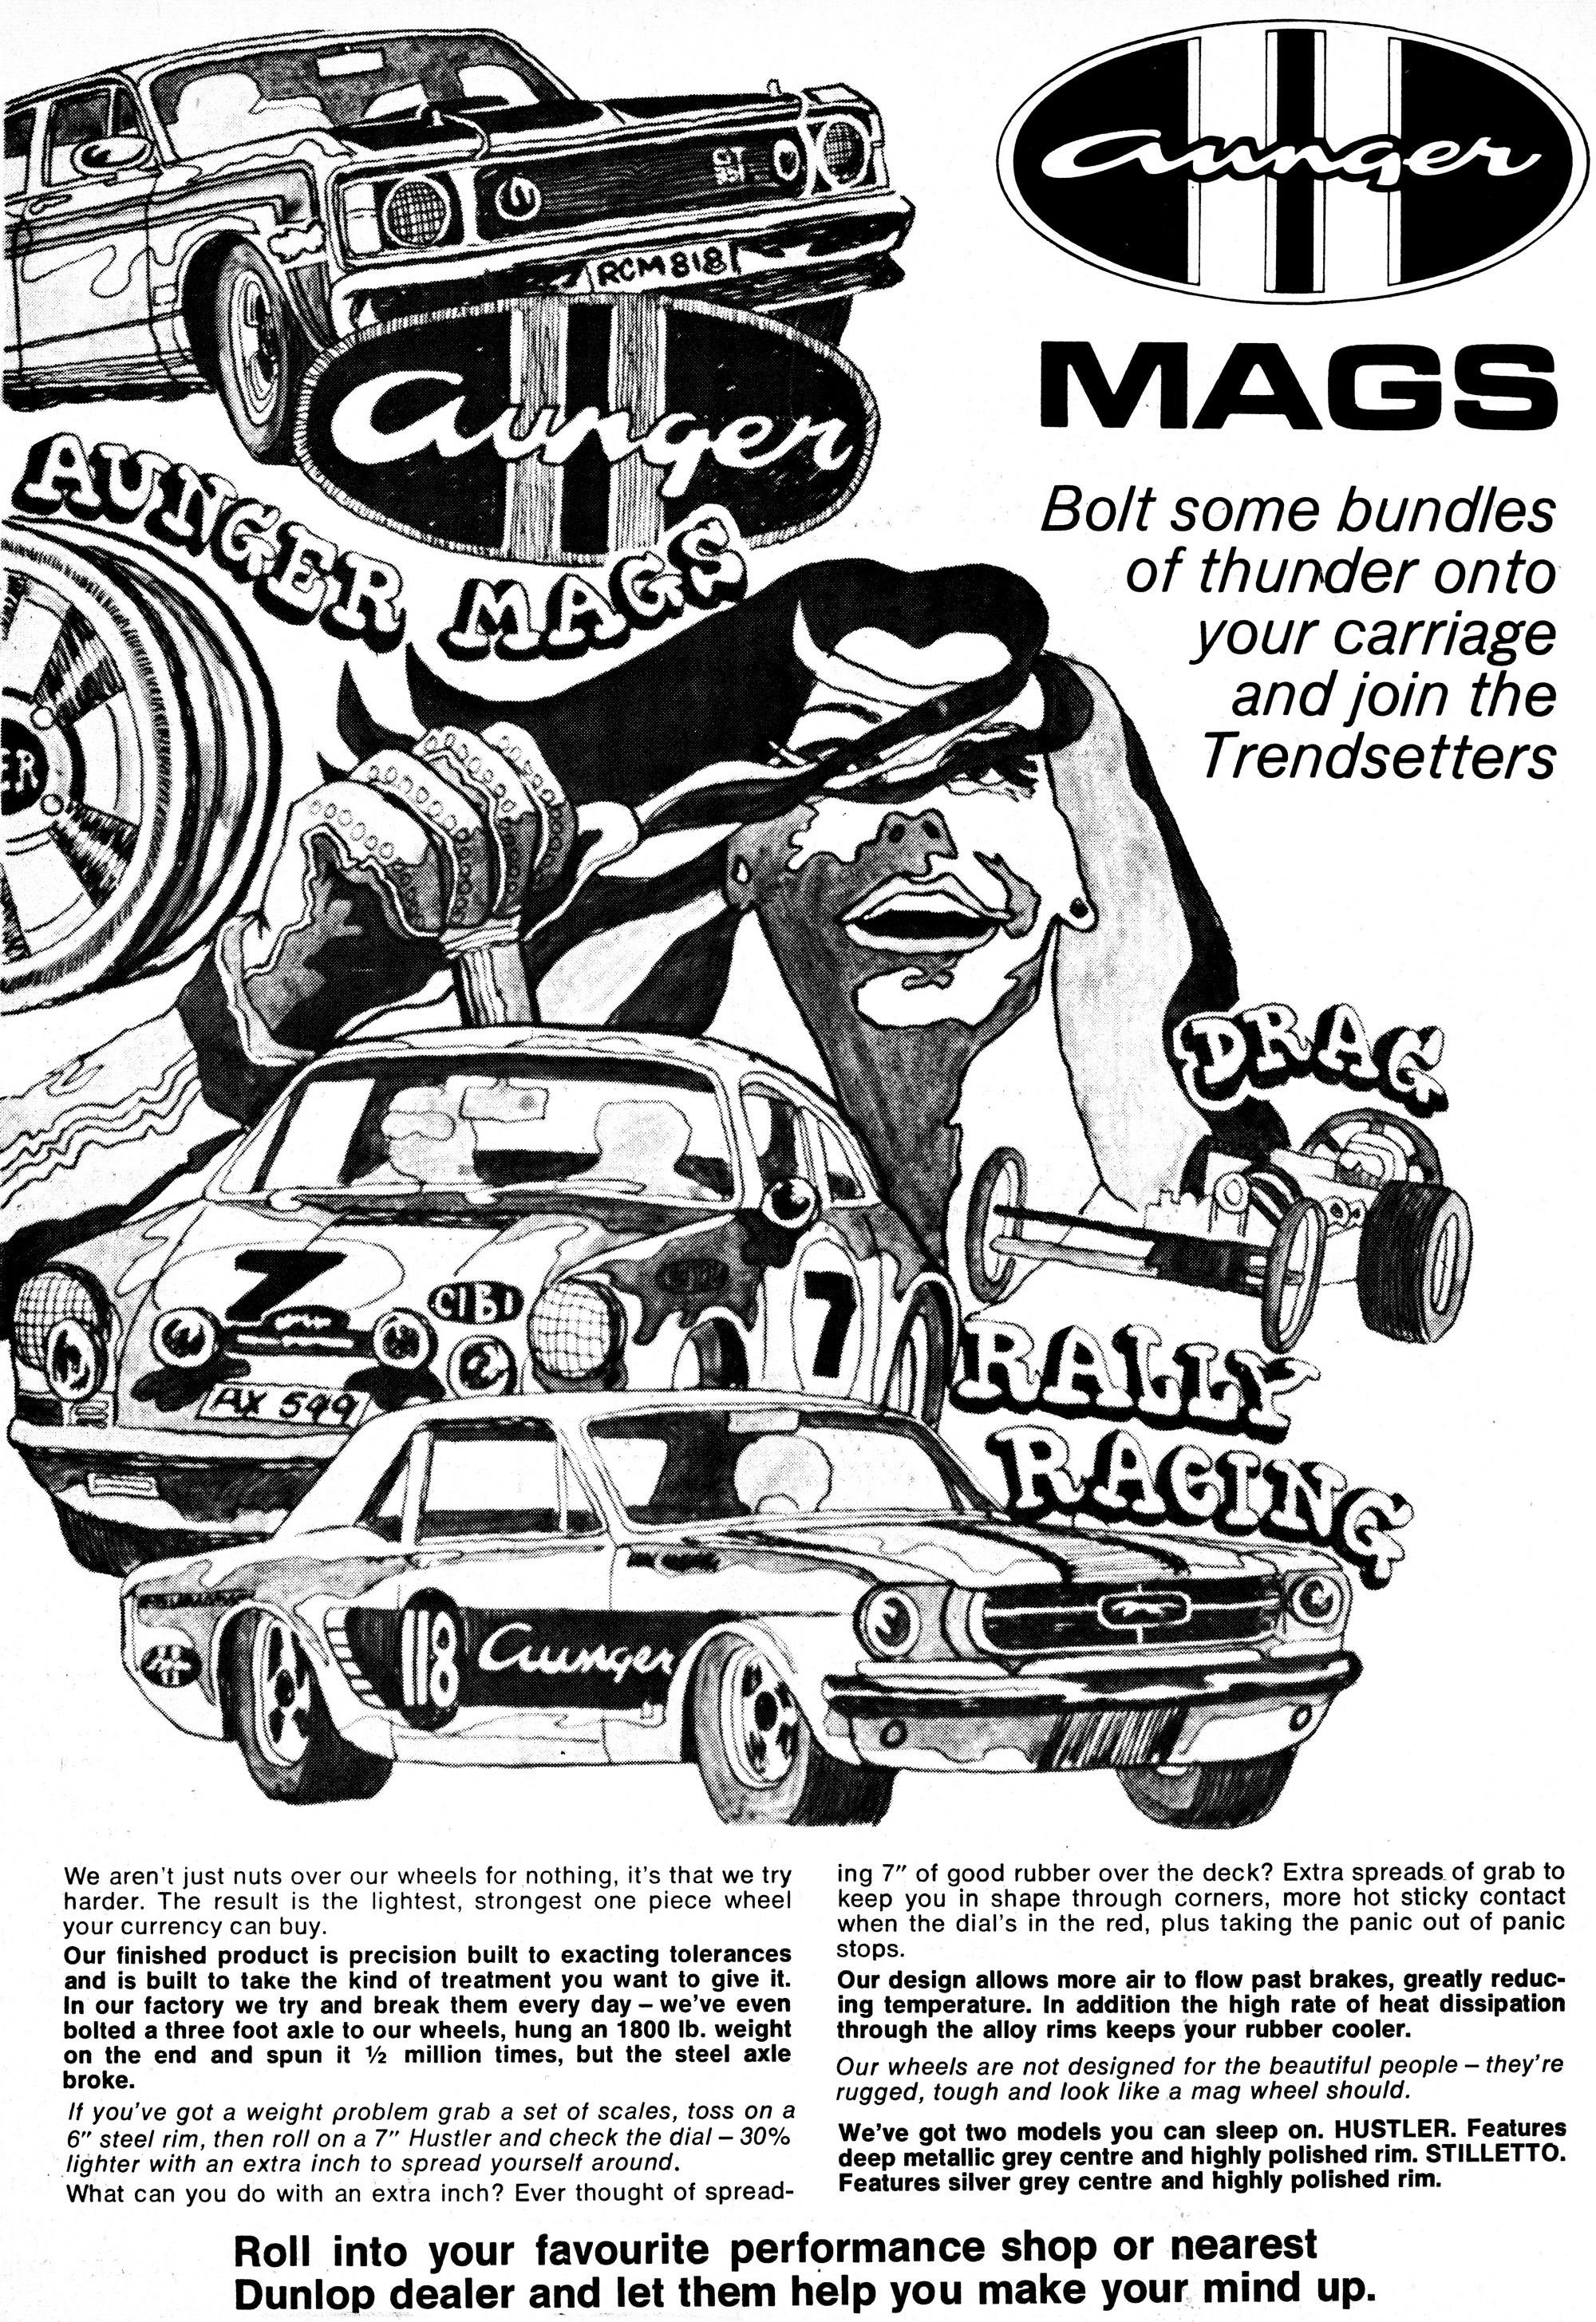 1970 Aunger Mags